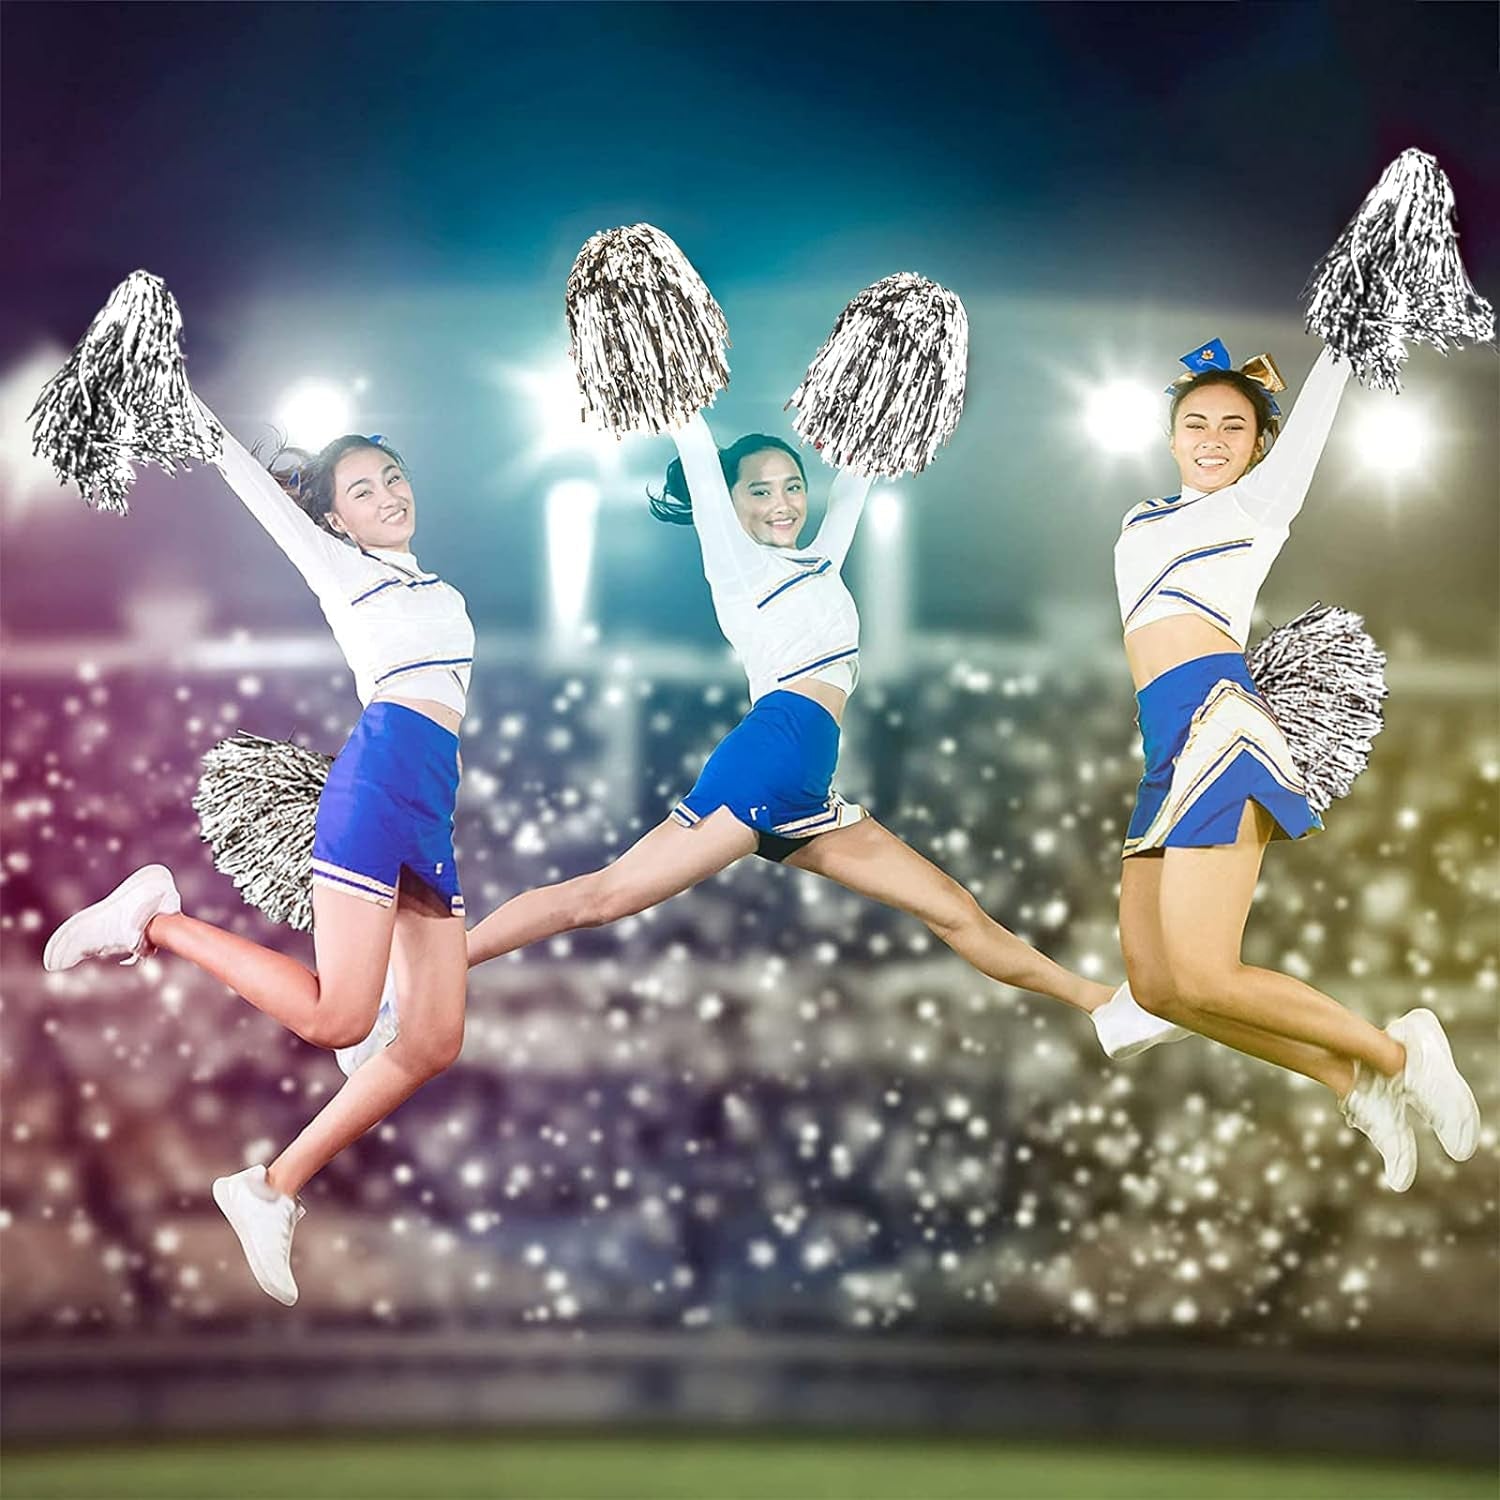 1 Piece Cheer Dance Sport Competition Cheerleading Pom Poms Flower Ball for  For Football Basketball Match Pompon Children Use